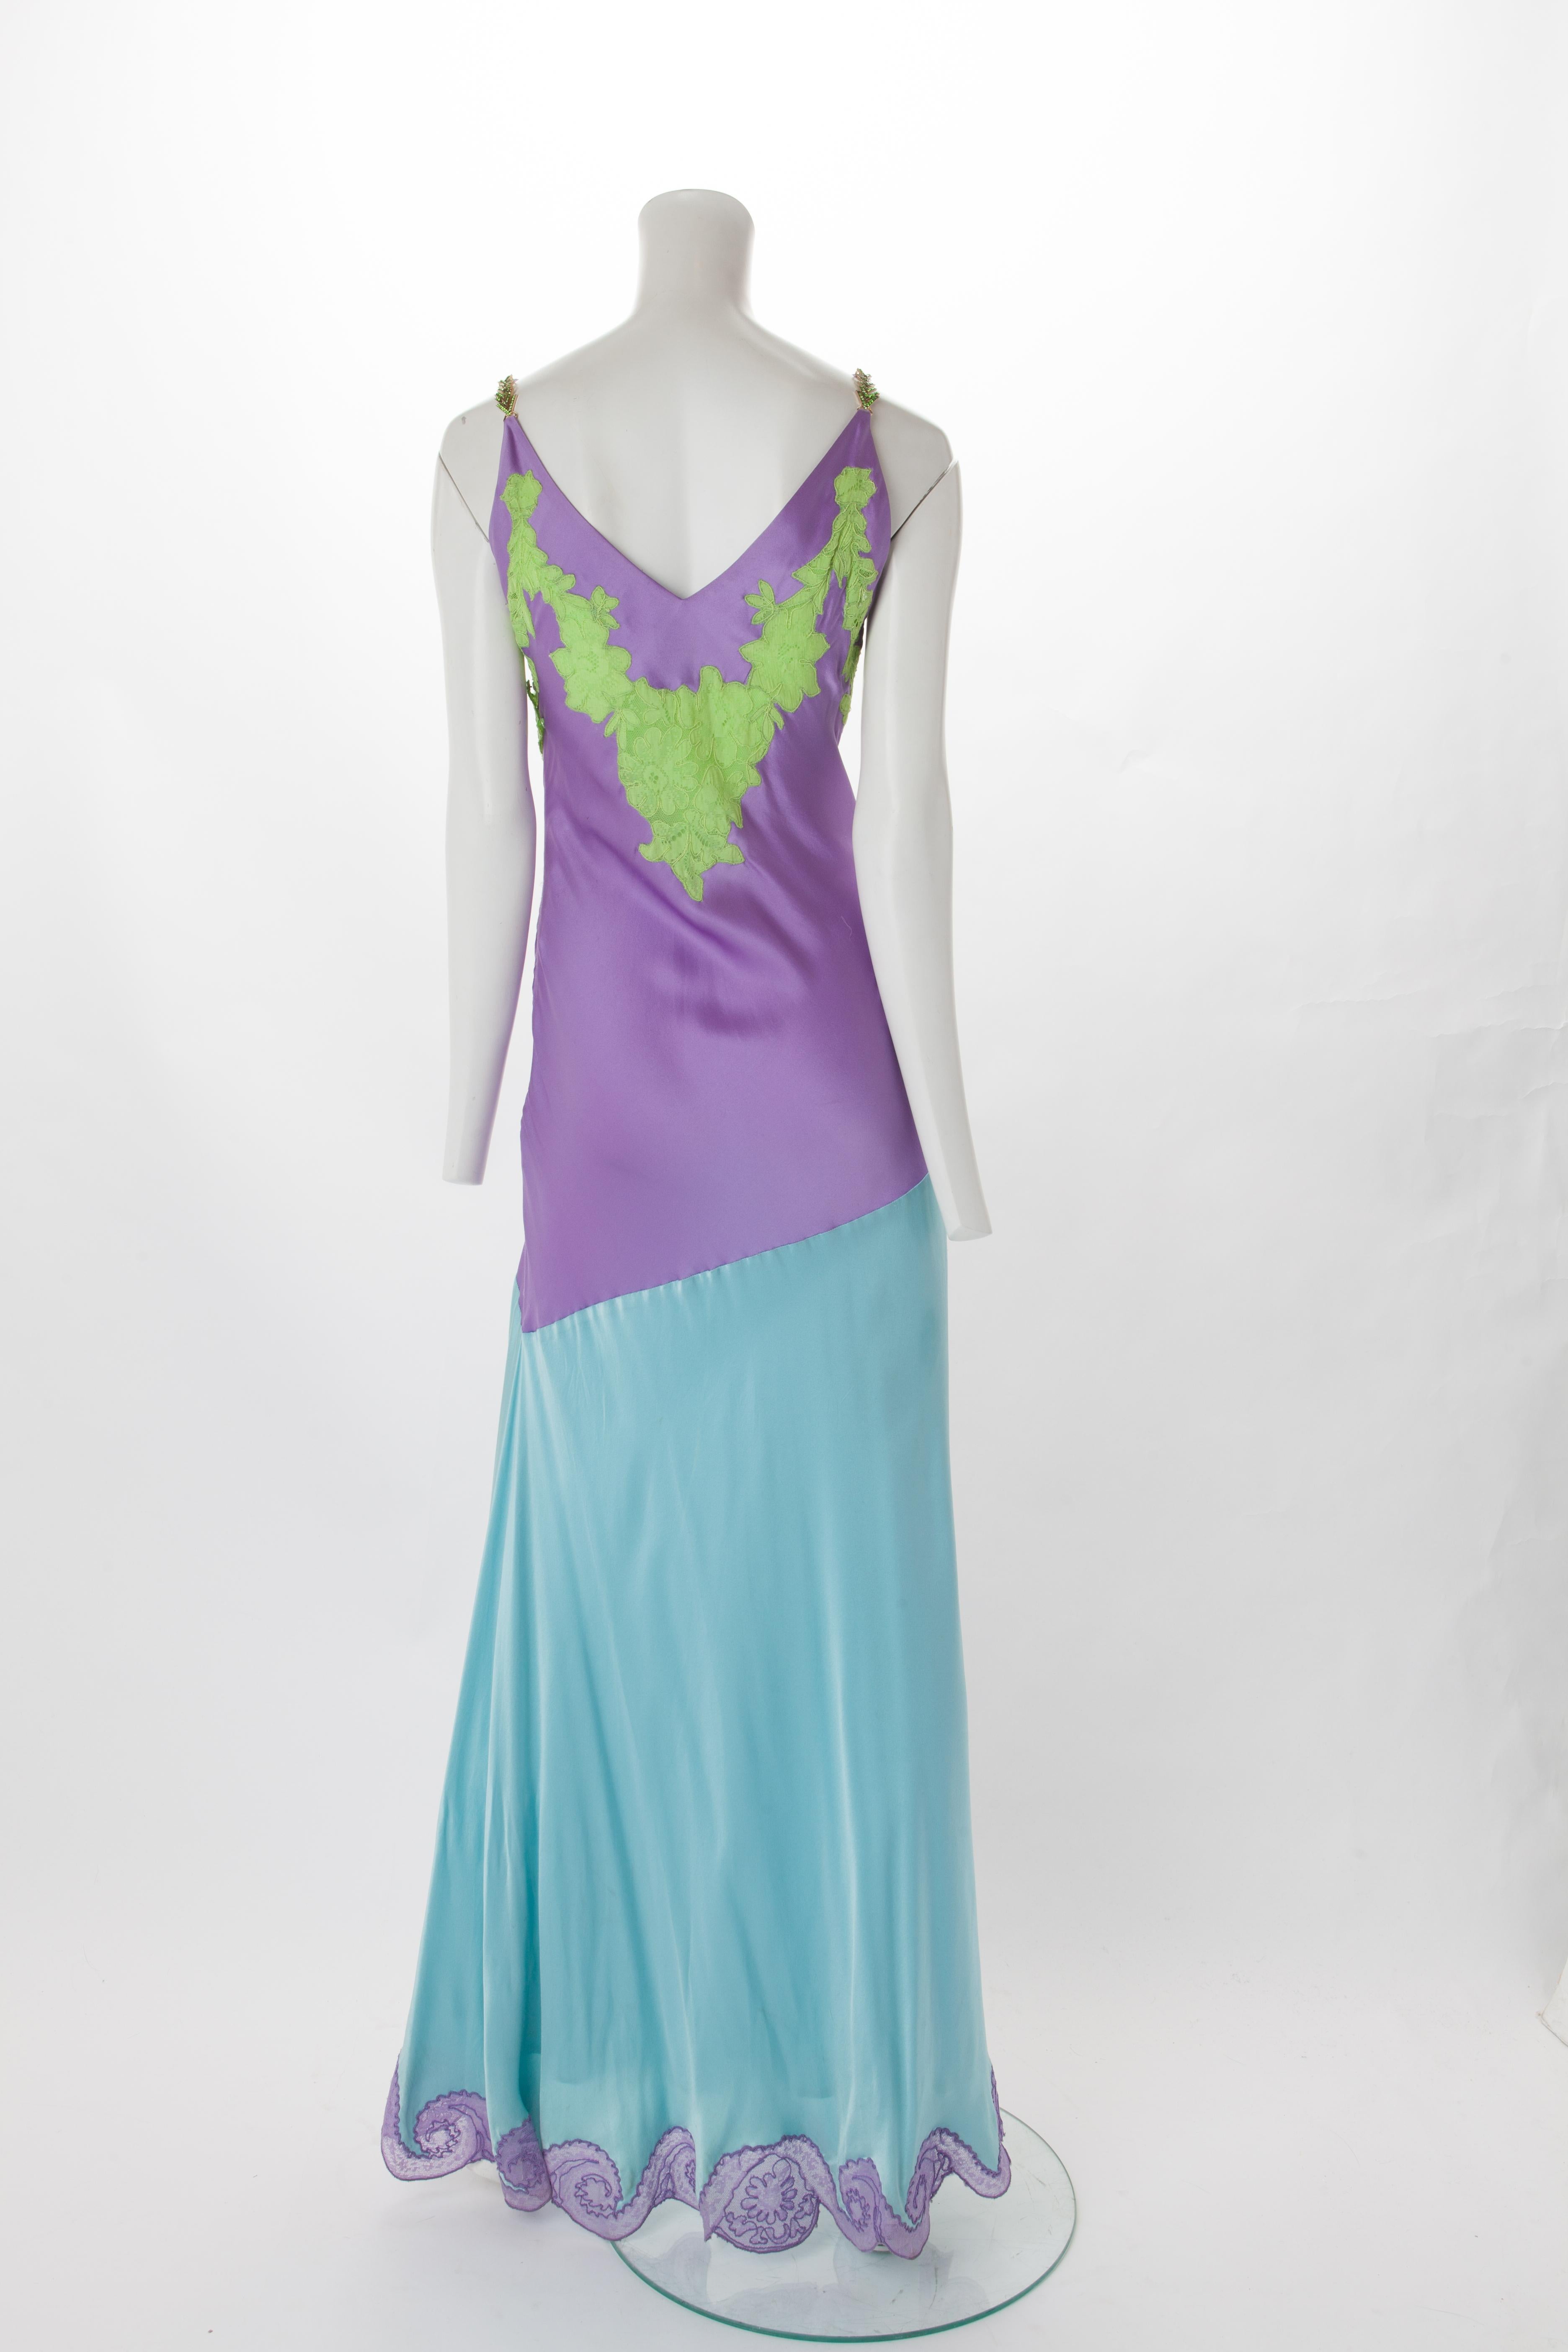 Gianni Versace Purple and Blue Satin Gown with Lace Appliqué, 1996.
Purple satin bodice with green lace appliqué at bust and blue satin skirt with purple lace appliqué along slit and hem.
Gathering at hip with gold with gold and emerald crystal bee